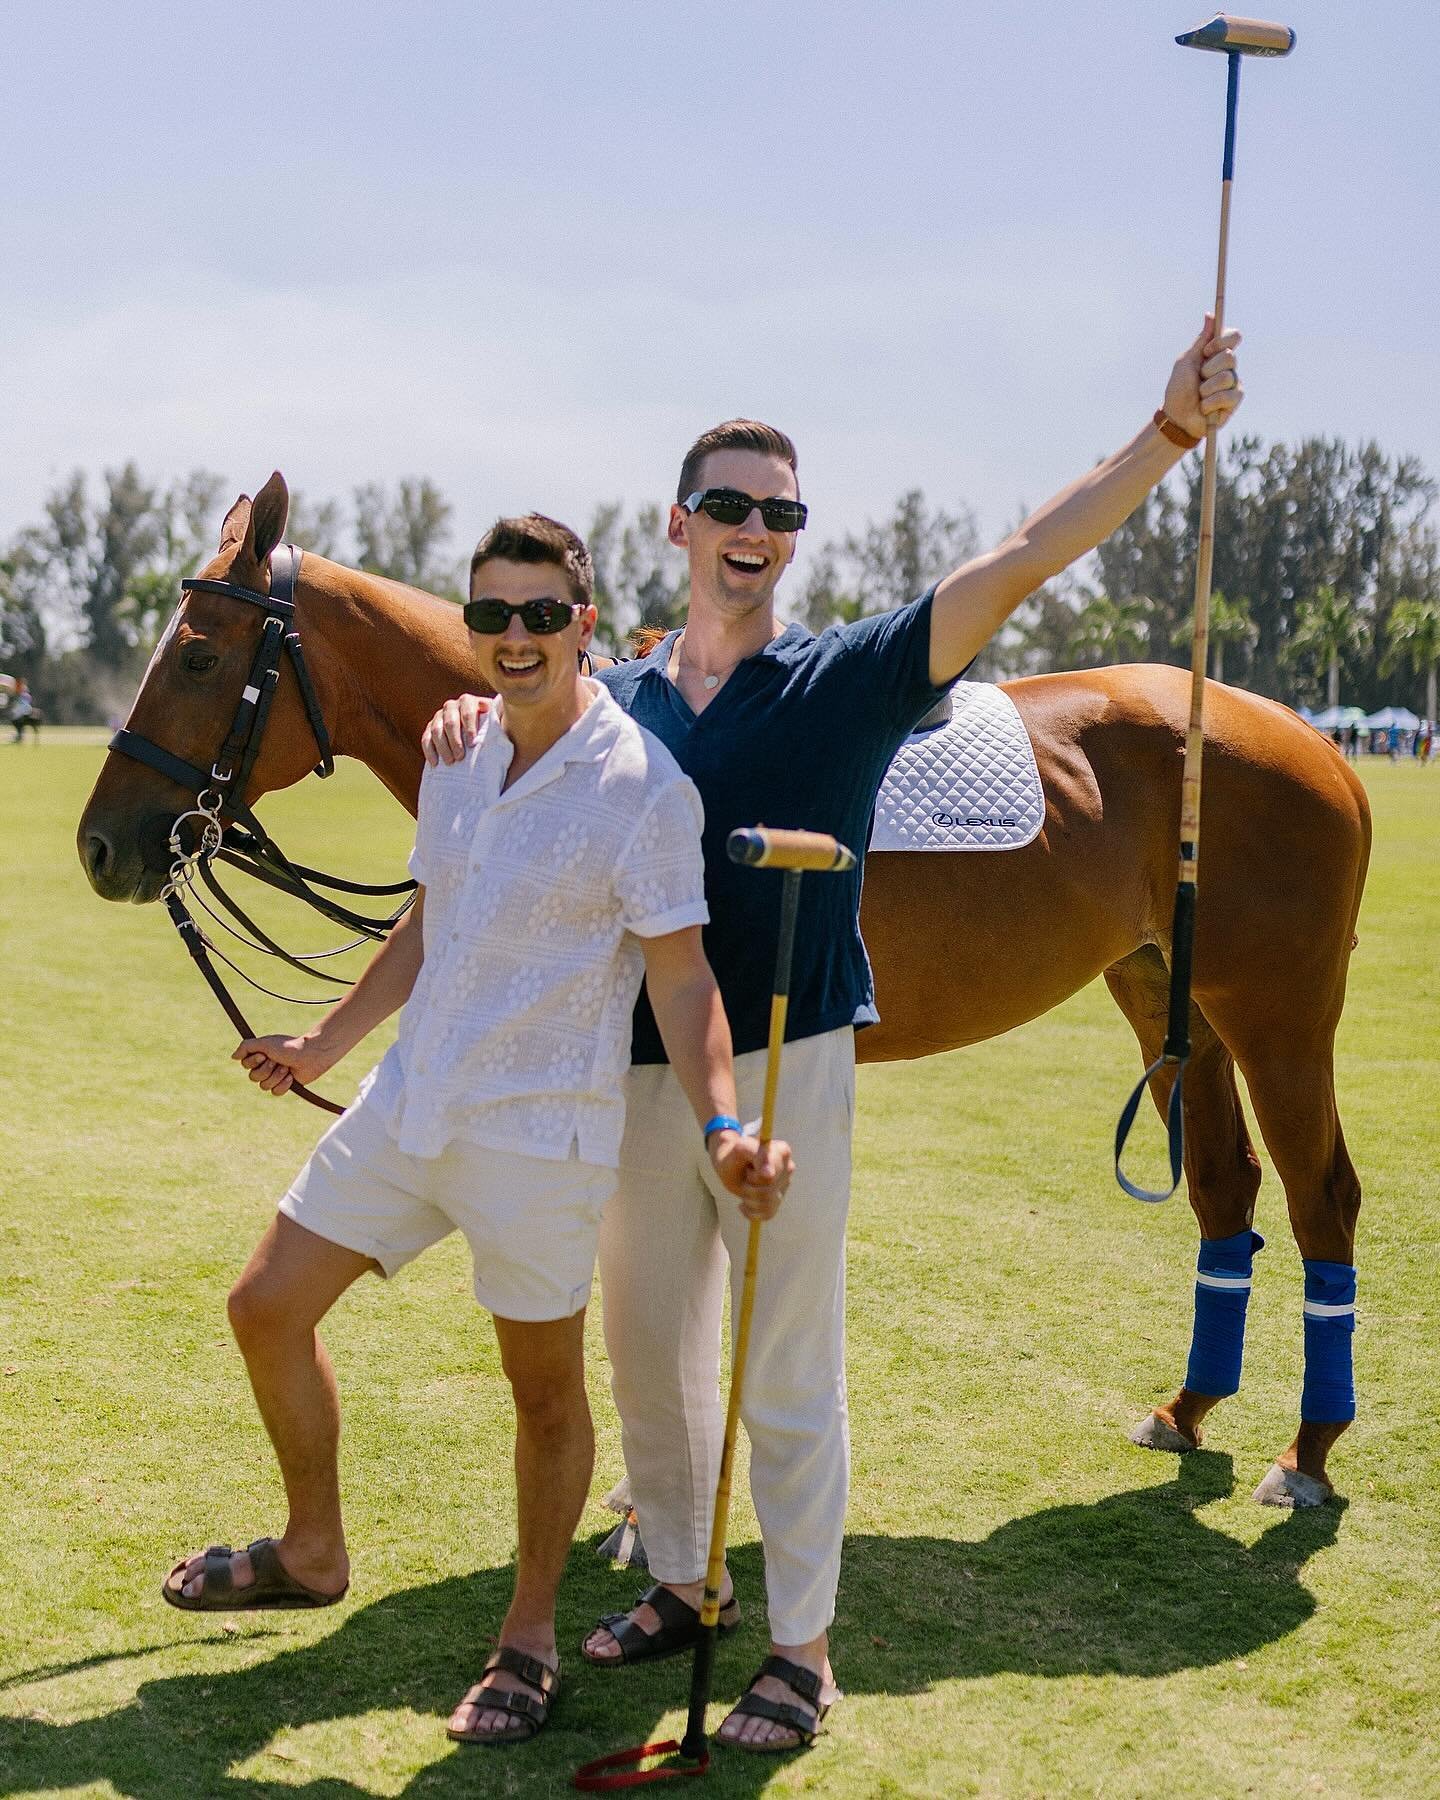 What do you feed a gay horse? &hellip;Hayyy! 🐴🌈
 
We&rsquo;re riding a high from watching all the action at The Lexus International Gay Polo Tournament this last weekend in West Palm Beach. 😍 Talk about mounting a new journey!!

It was awesome to 